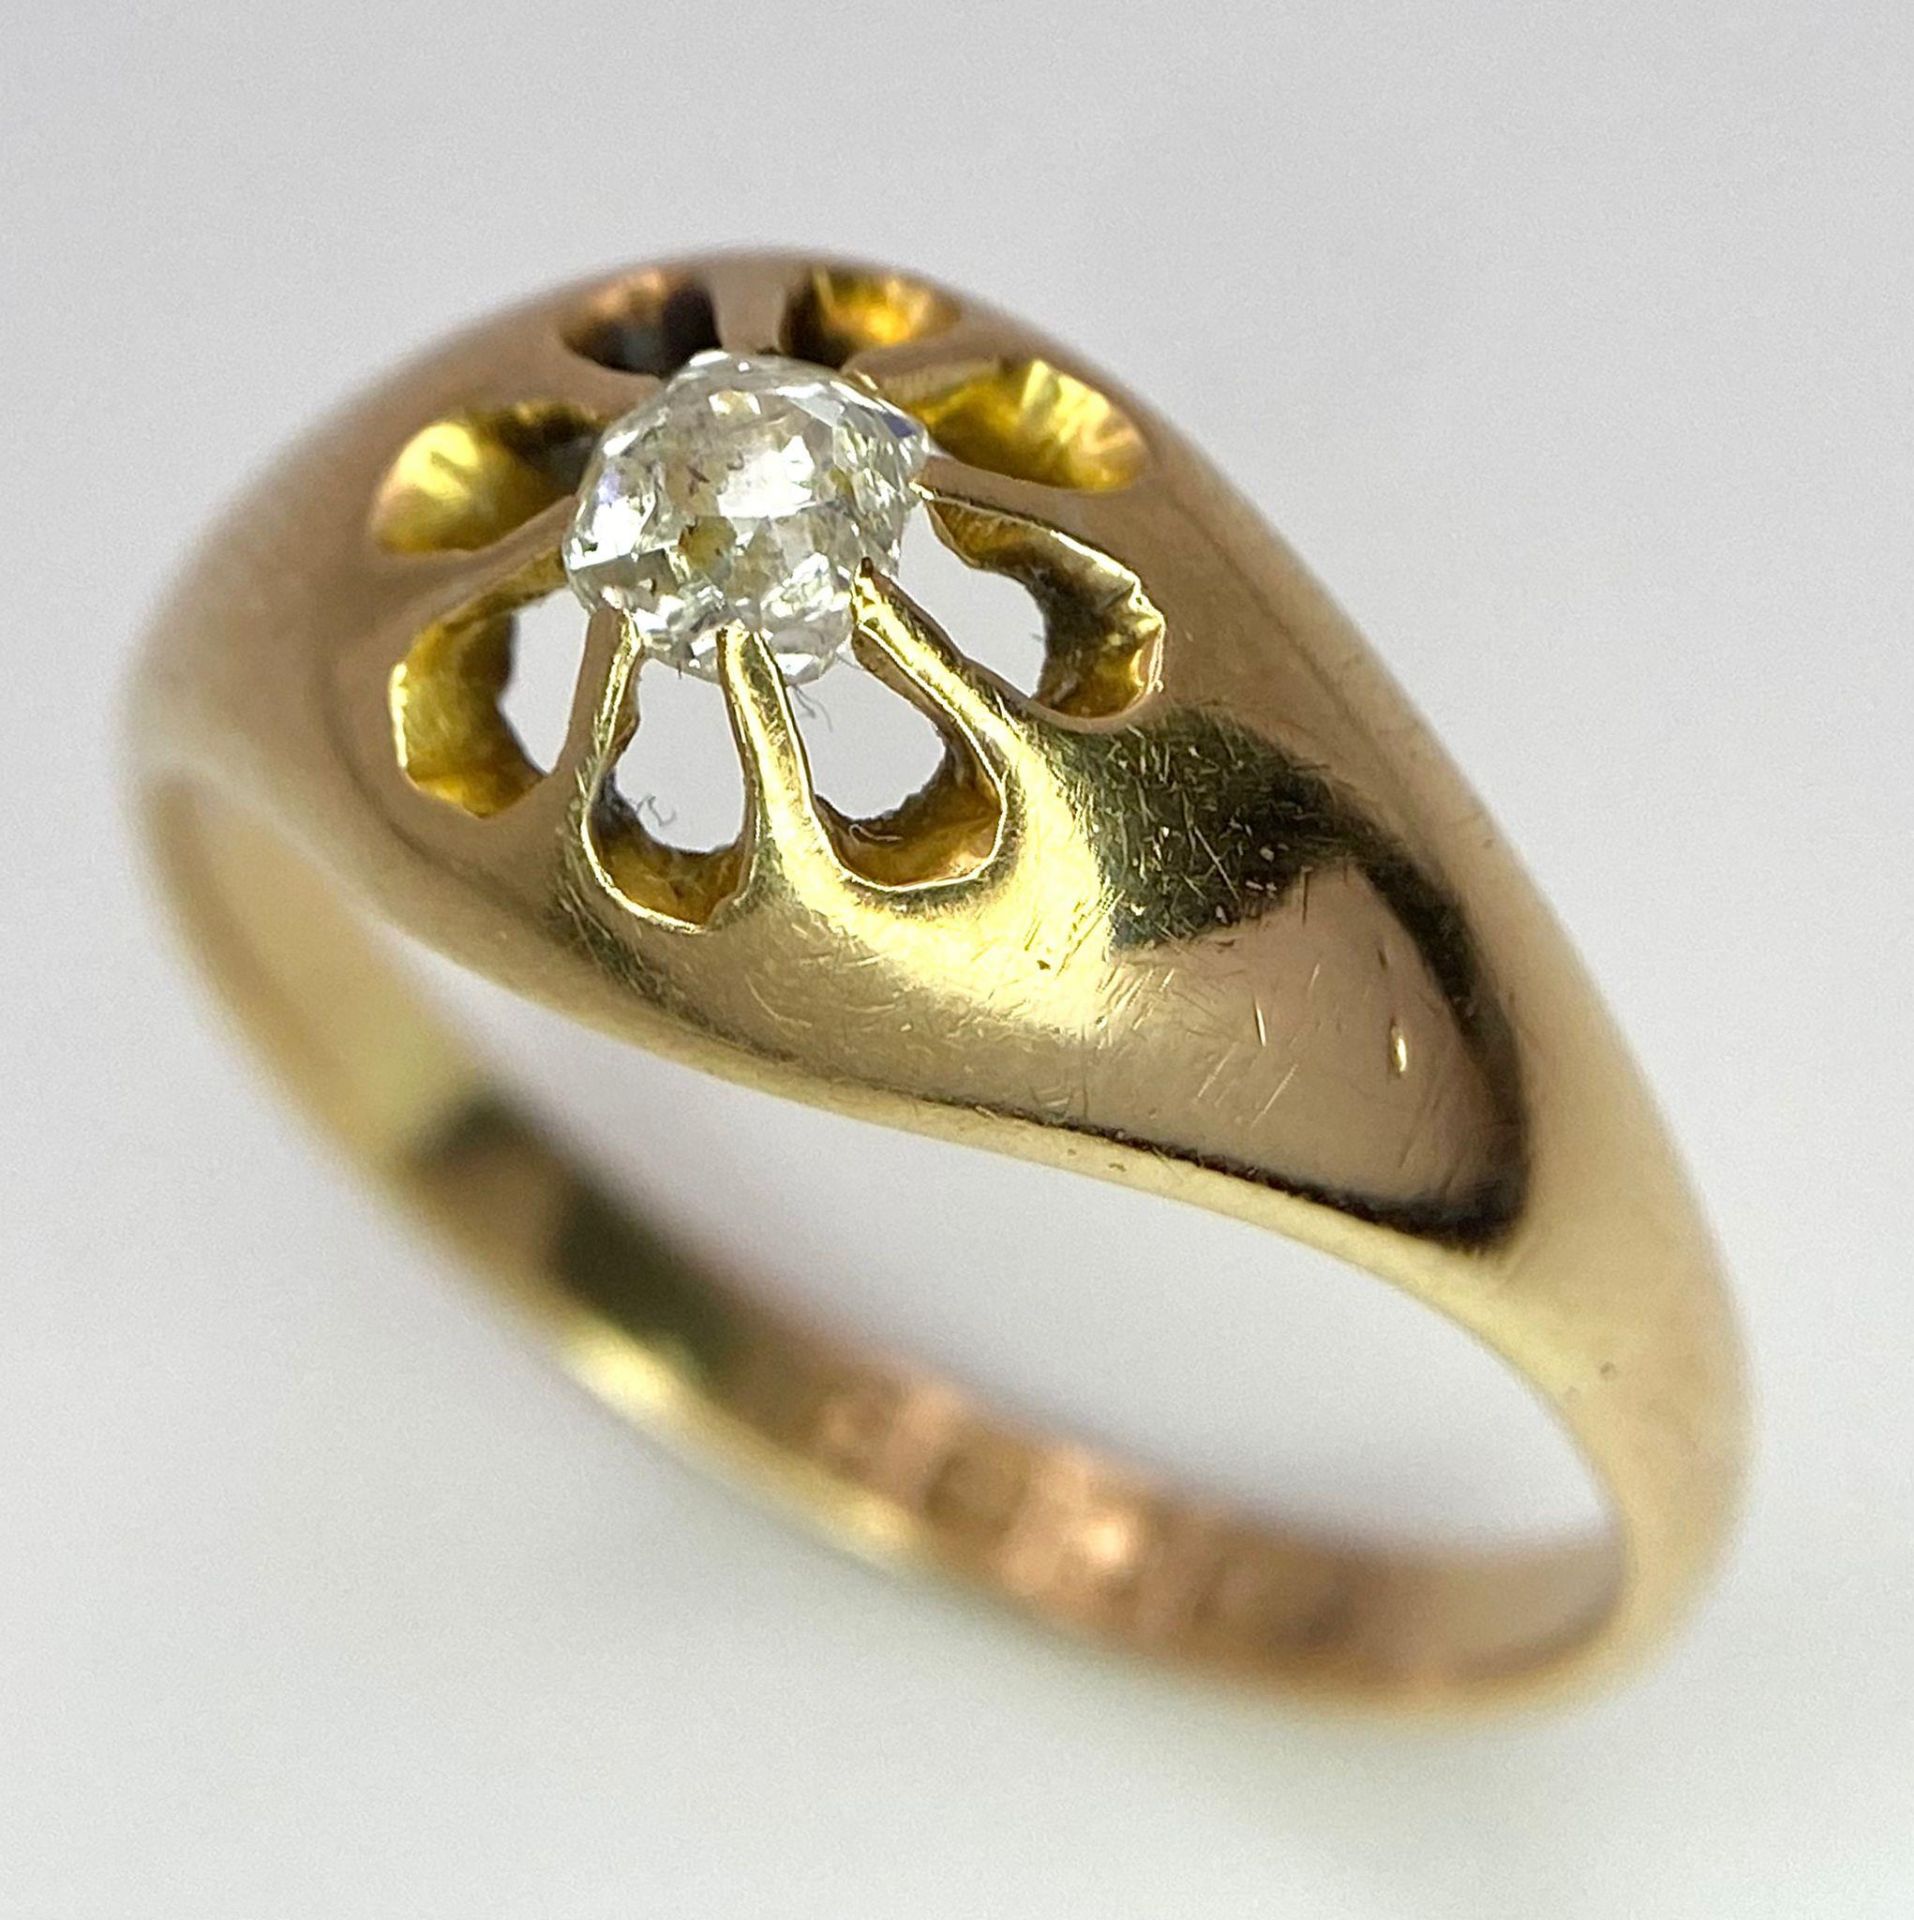 An antique - pre 1900- 18 K yellow gold diamond (0.25 carats) solitaire ring, hallmarked Chester,